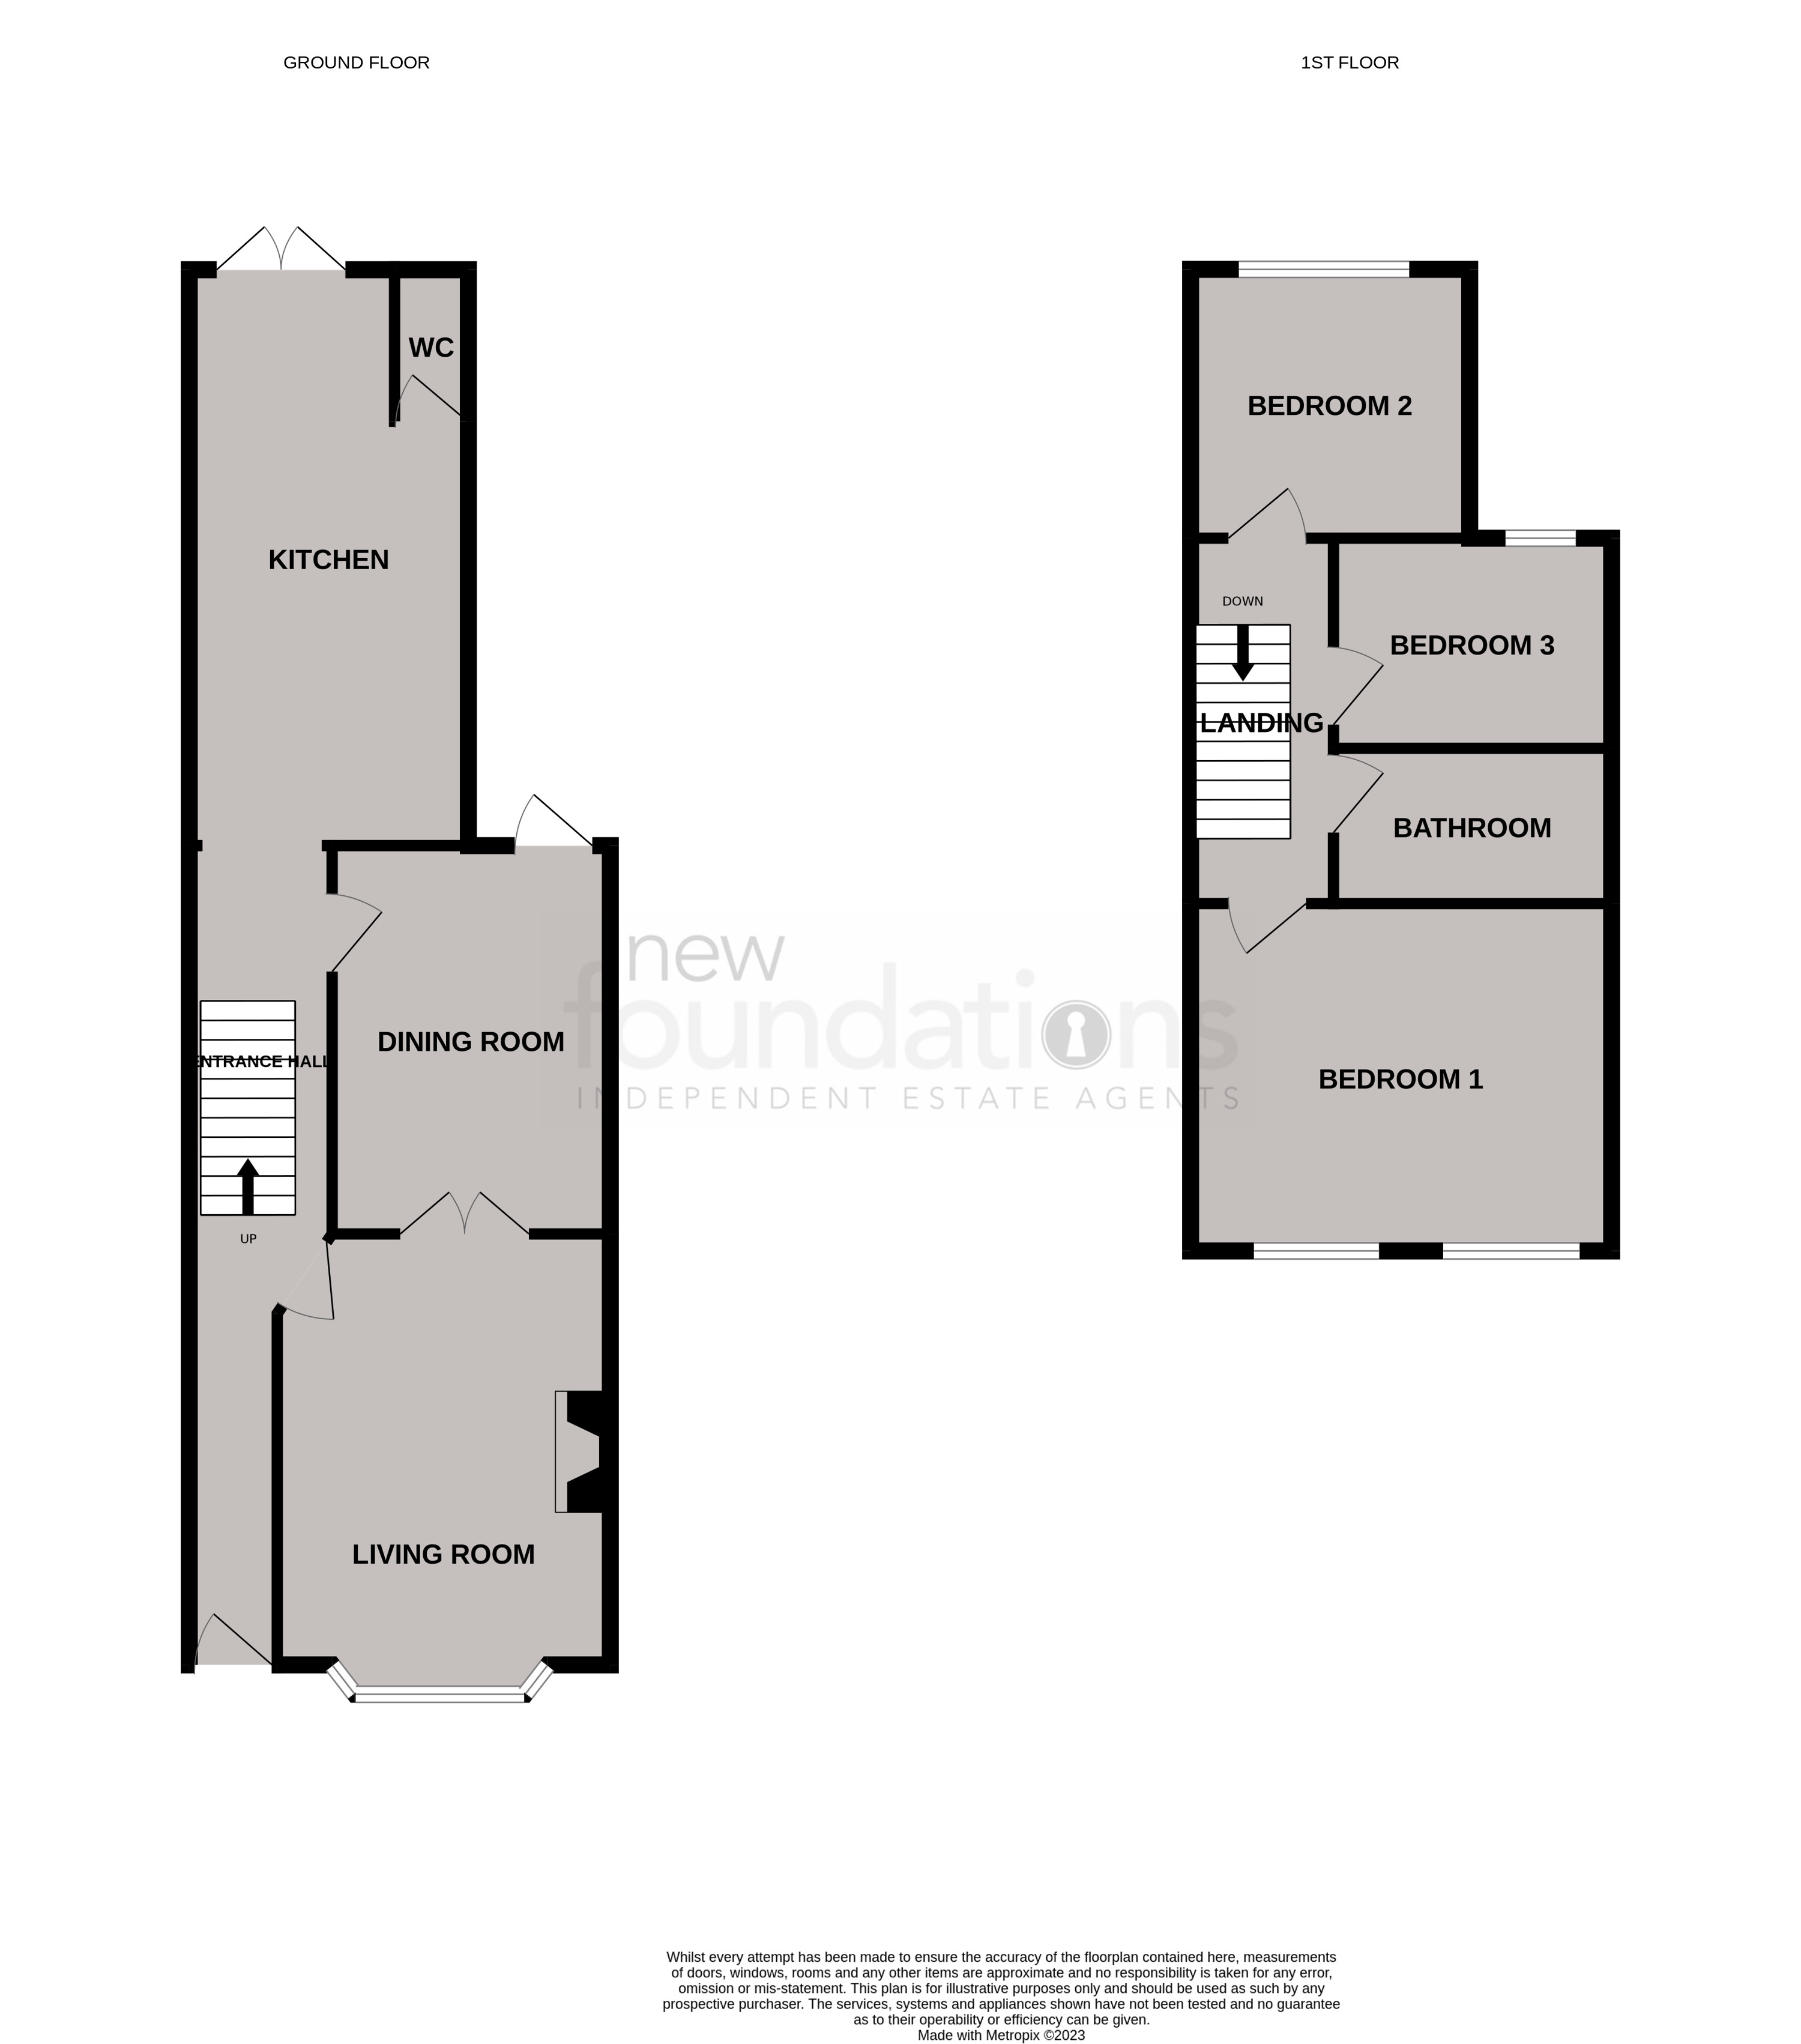 Floorplans For Windsor Road, Bexhill-on-Sea, East Sussex